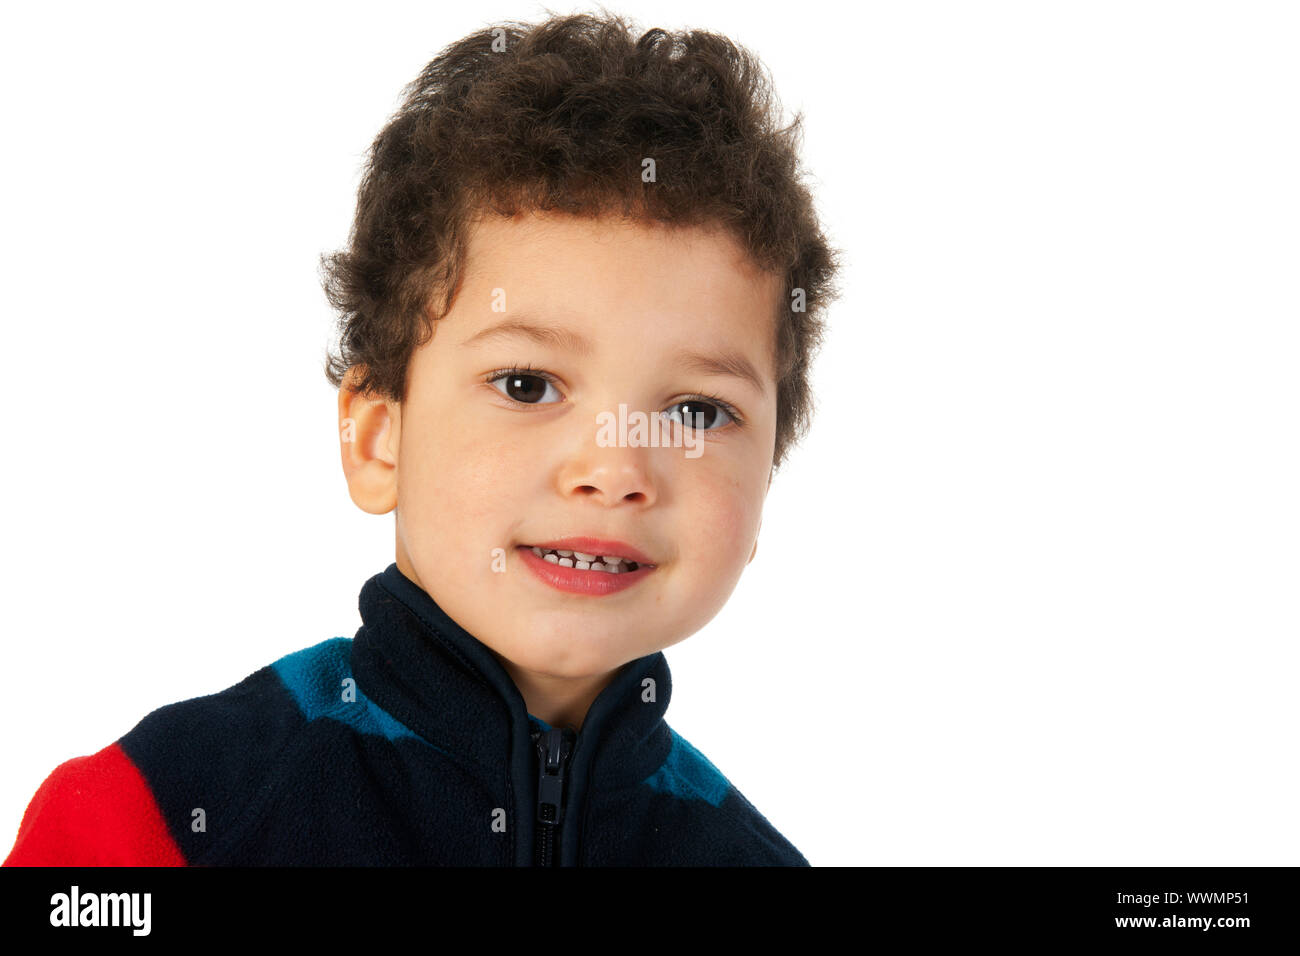 Little Boy With Black Curly Hair In The Studio Stock Photo Alamy